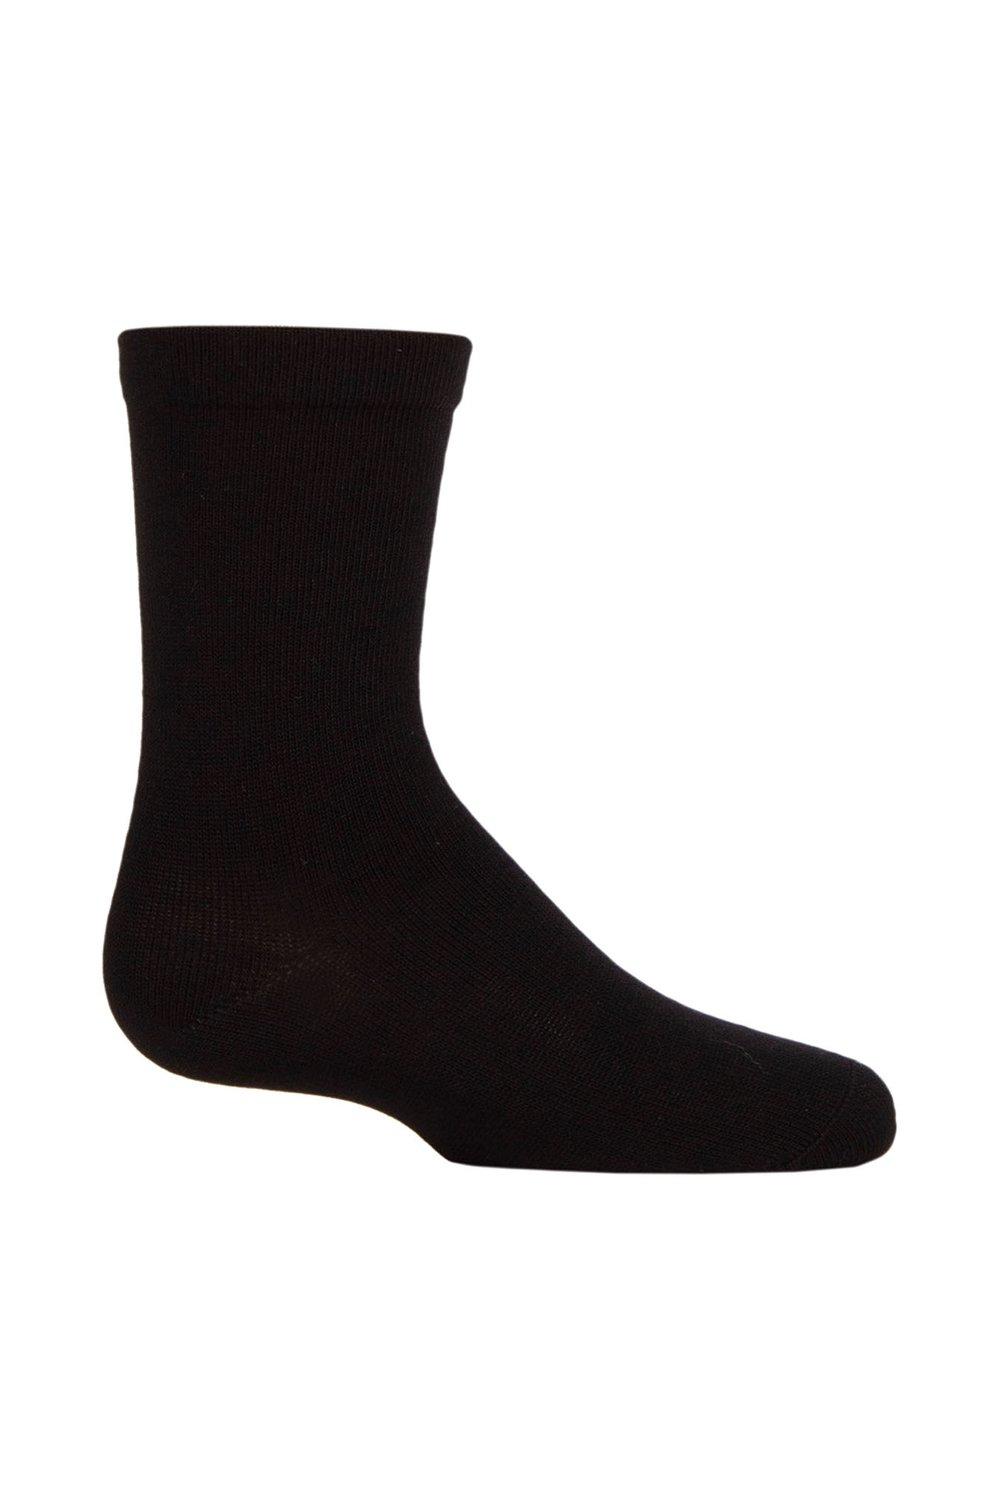 Boys and Girls 1 Pair SOCKSHOP Plain Mid-Weight Bamboo Socks with Comfort Cuff and Smooth Toe Seams